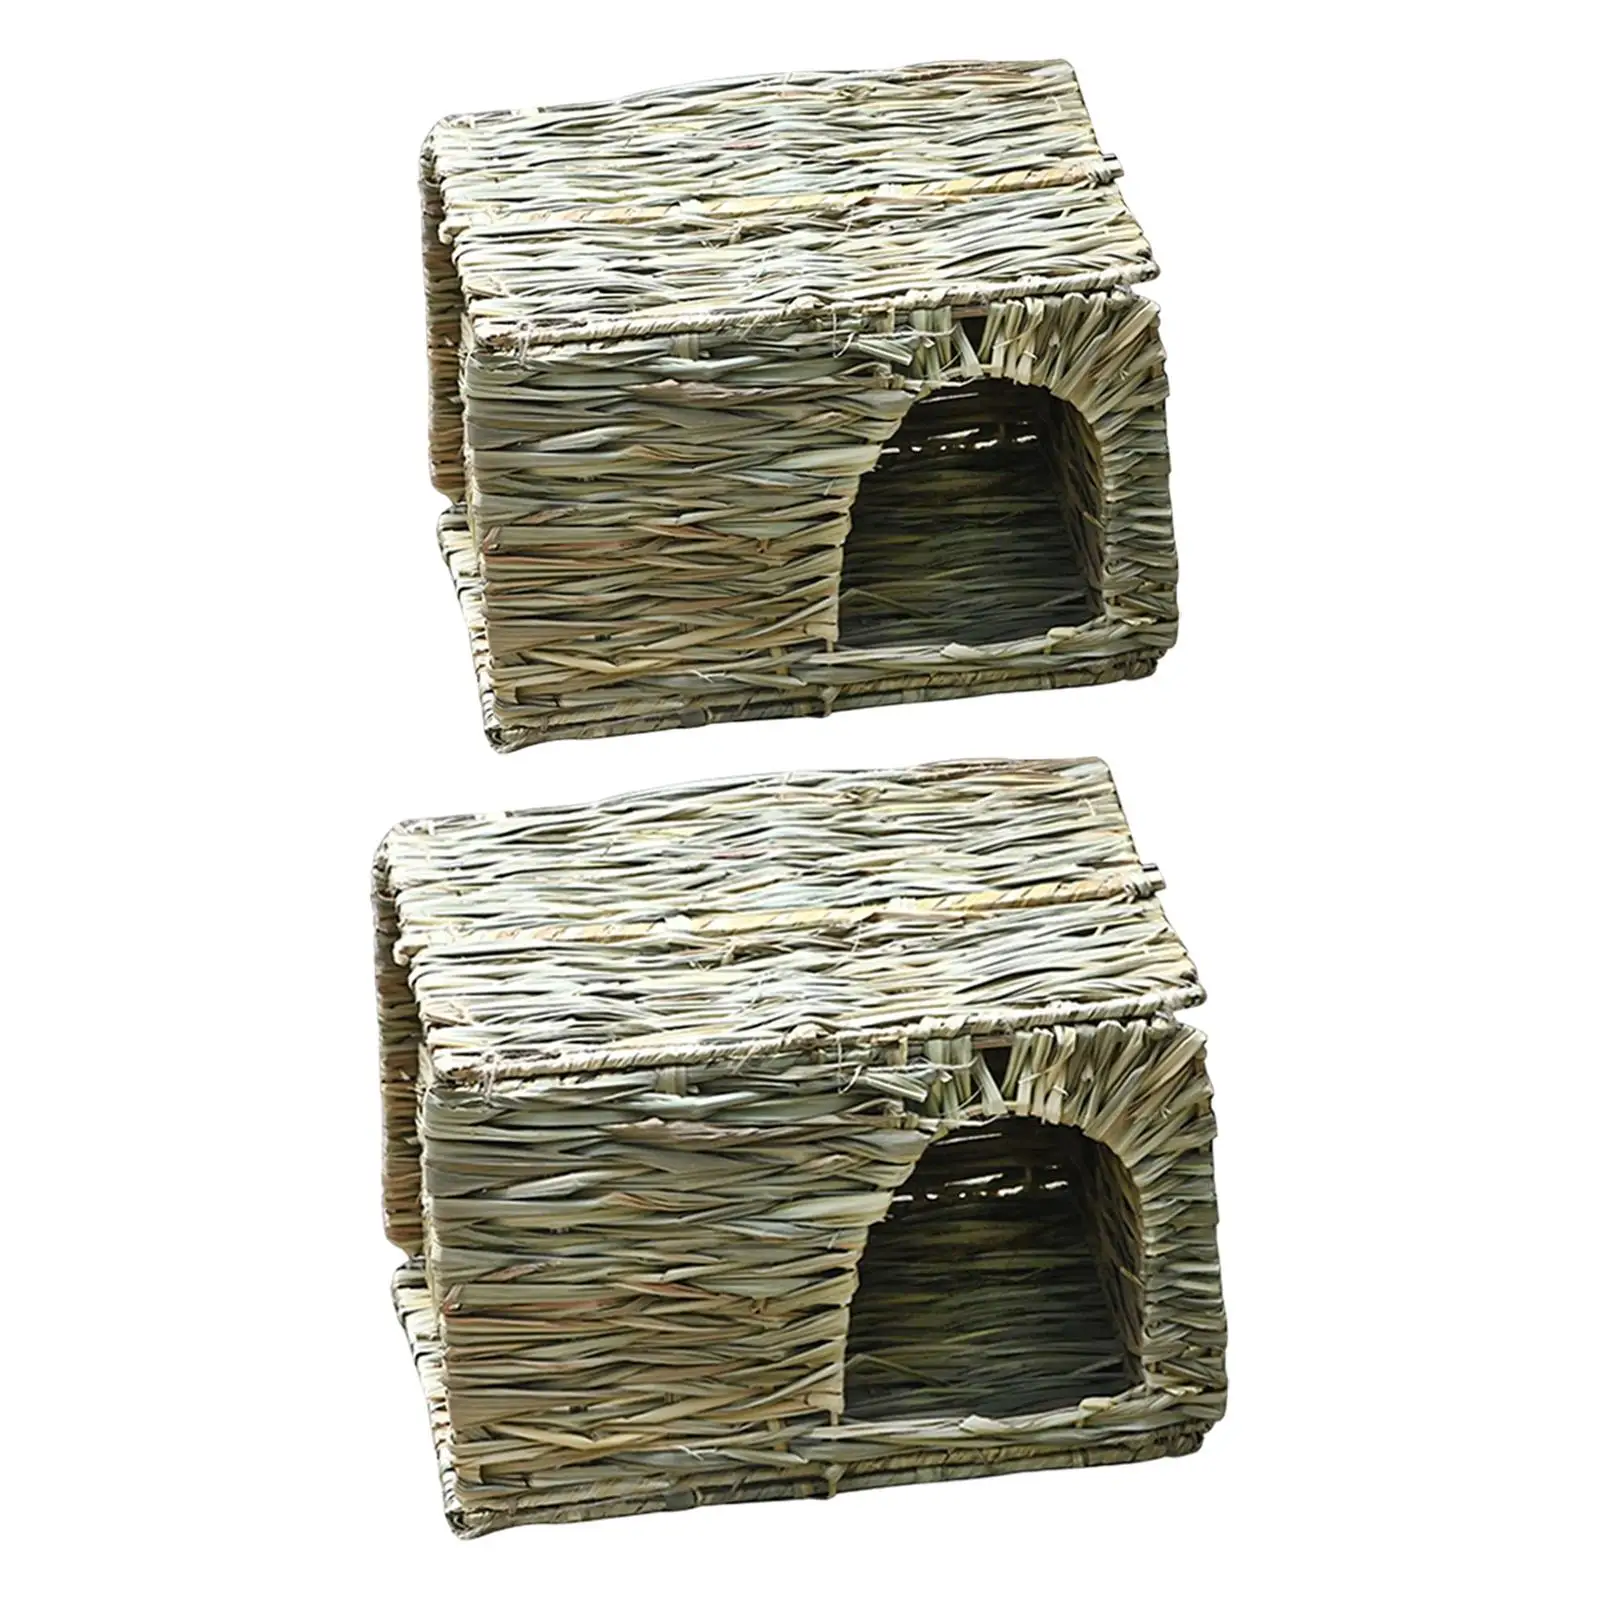 Birds Nest Eco Friendly Hideaway Rest Place bird House Hummingbird Straw Cage Shelter for Patio Indoor Outdoor